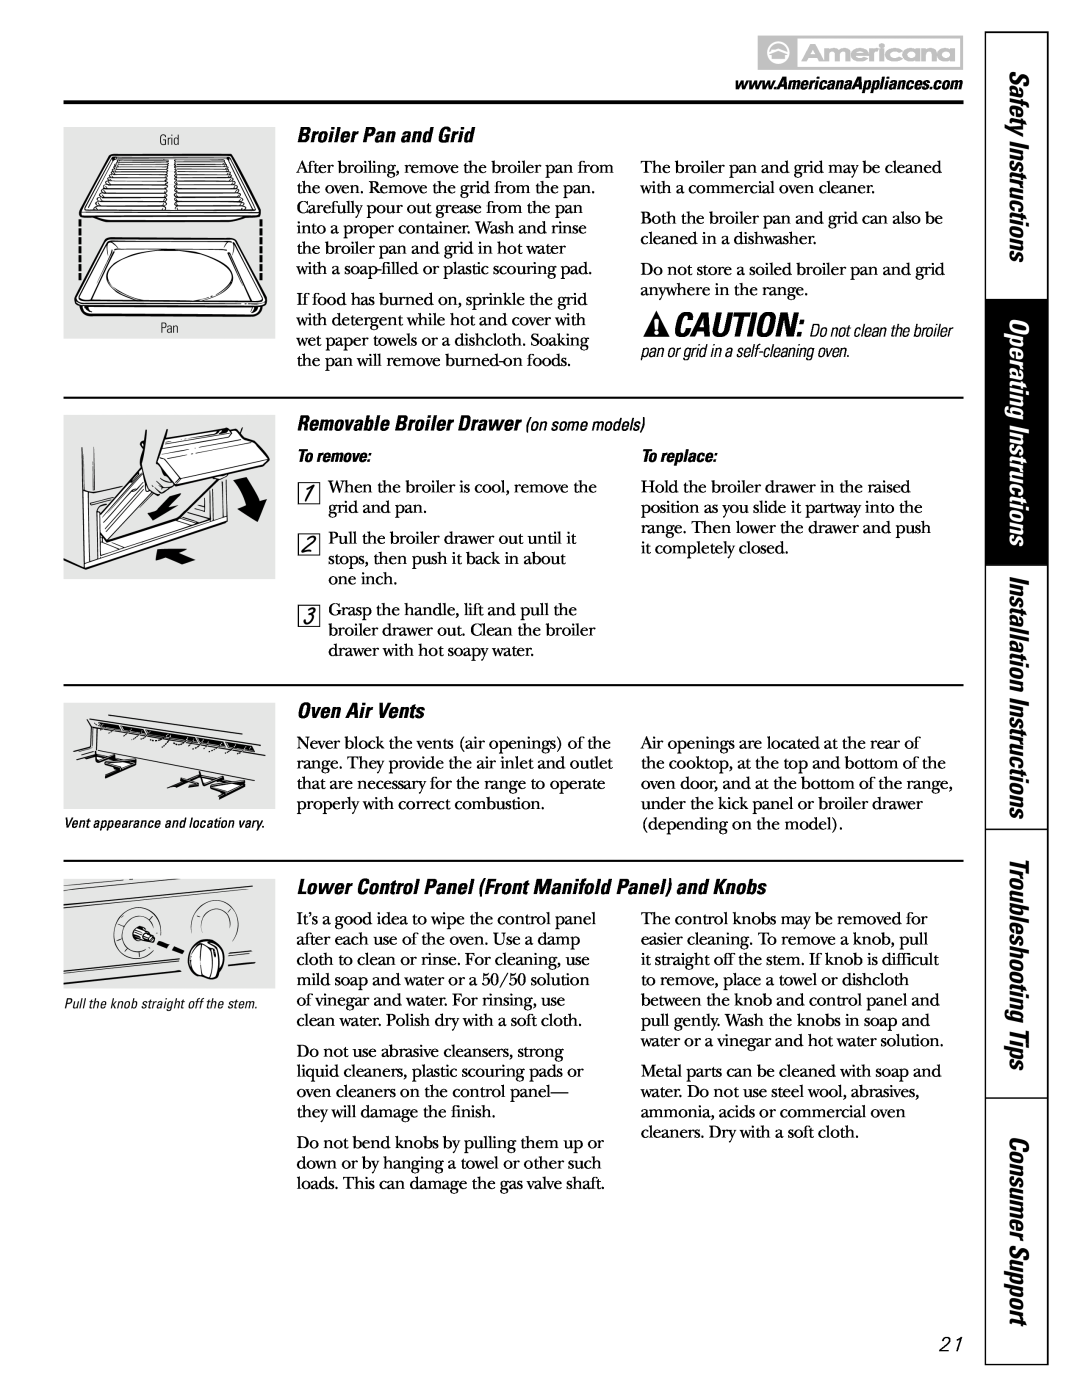 Americana Appliances AGBS300 Instructions Operating, Broiler Pan and Grid, Removable Broiler Drawer on some models, Safety 